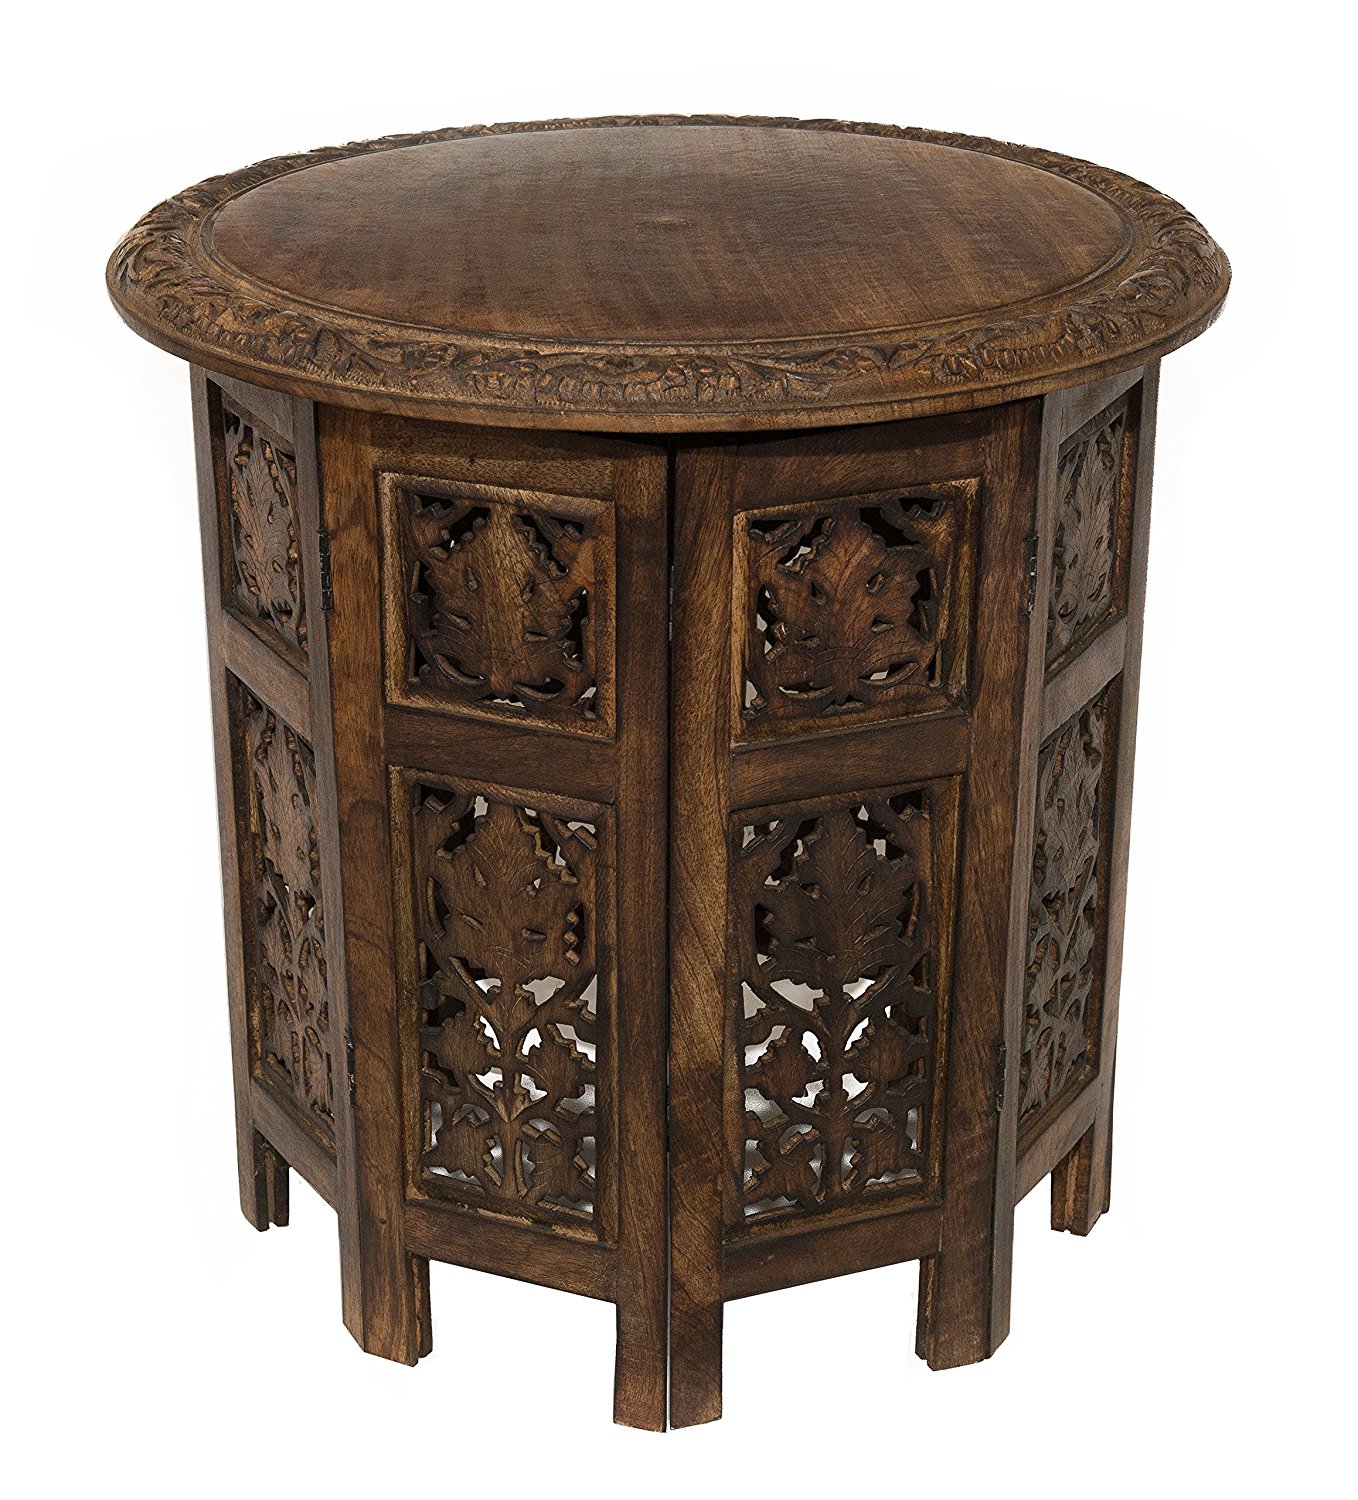 lovely small accent table for ornate with barn door wooden round west elm side chair bulk tablecloths weddings cherry wood corner metal patio coffee best designs chevron runner